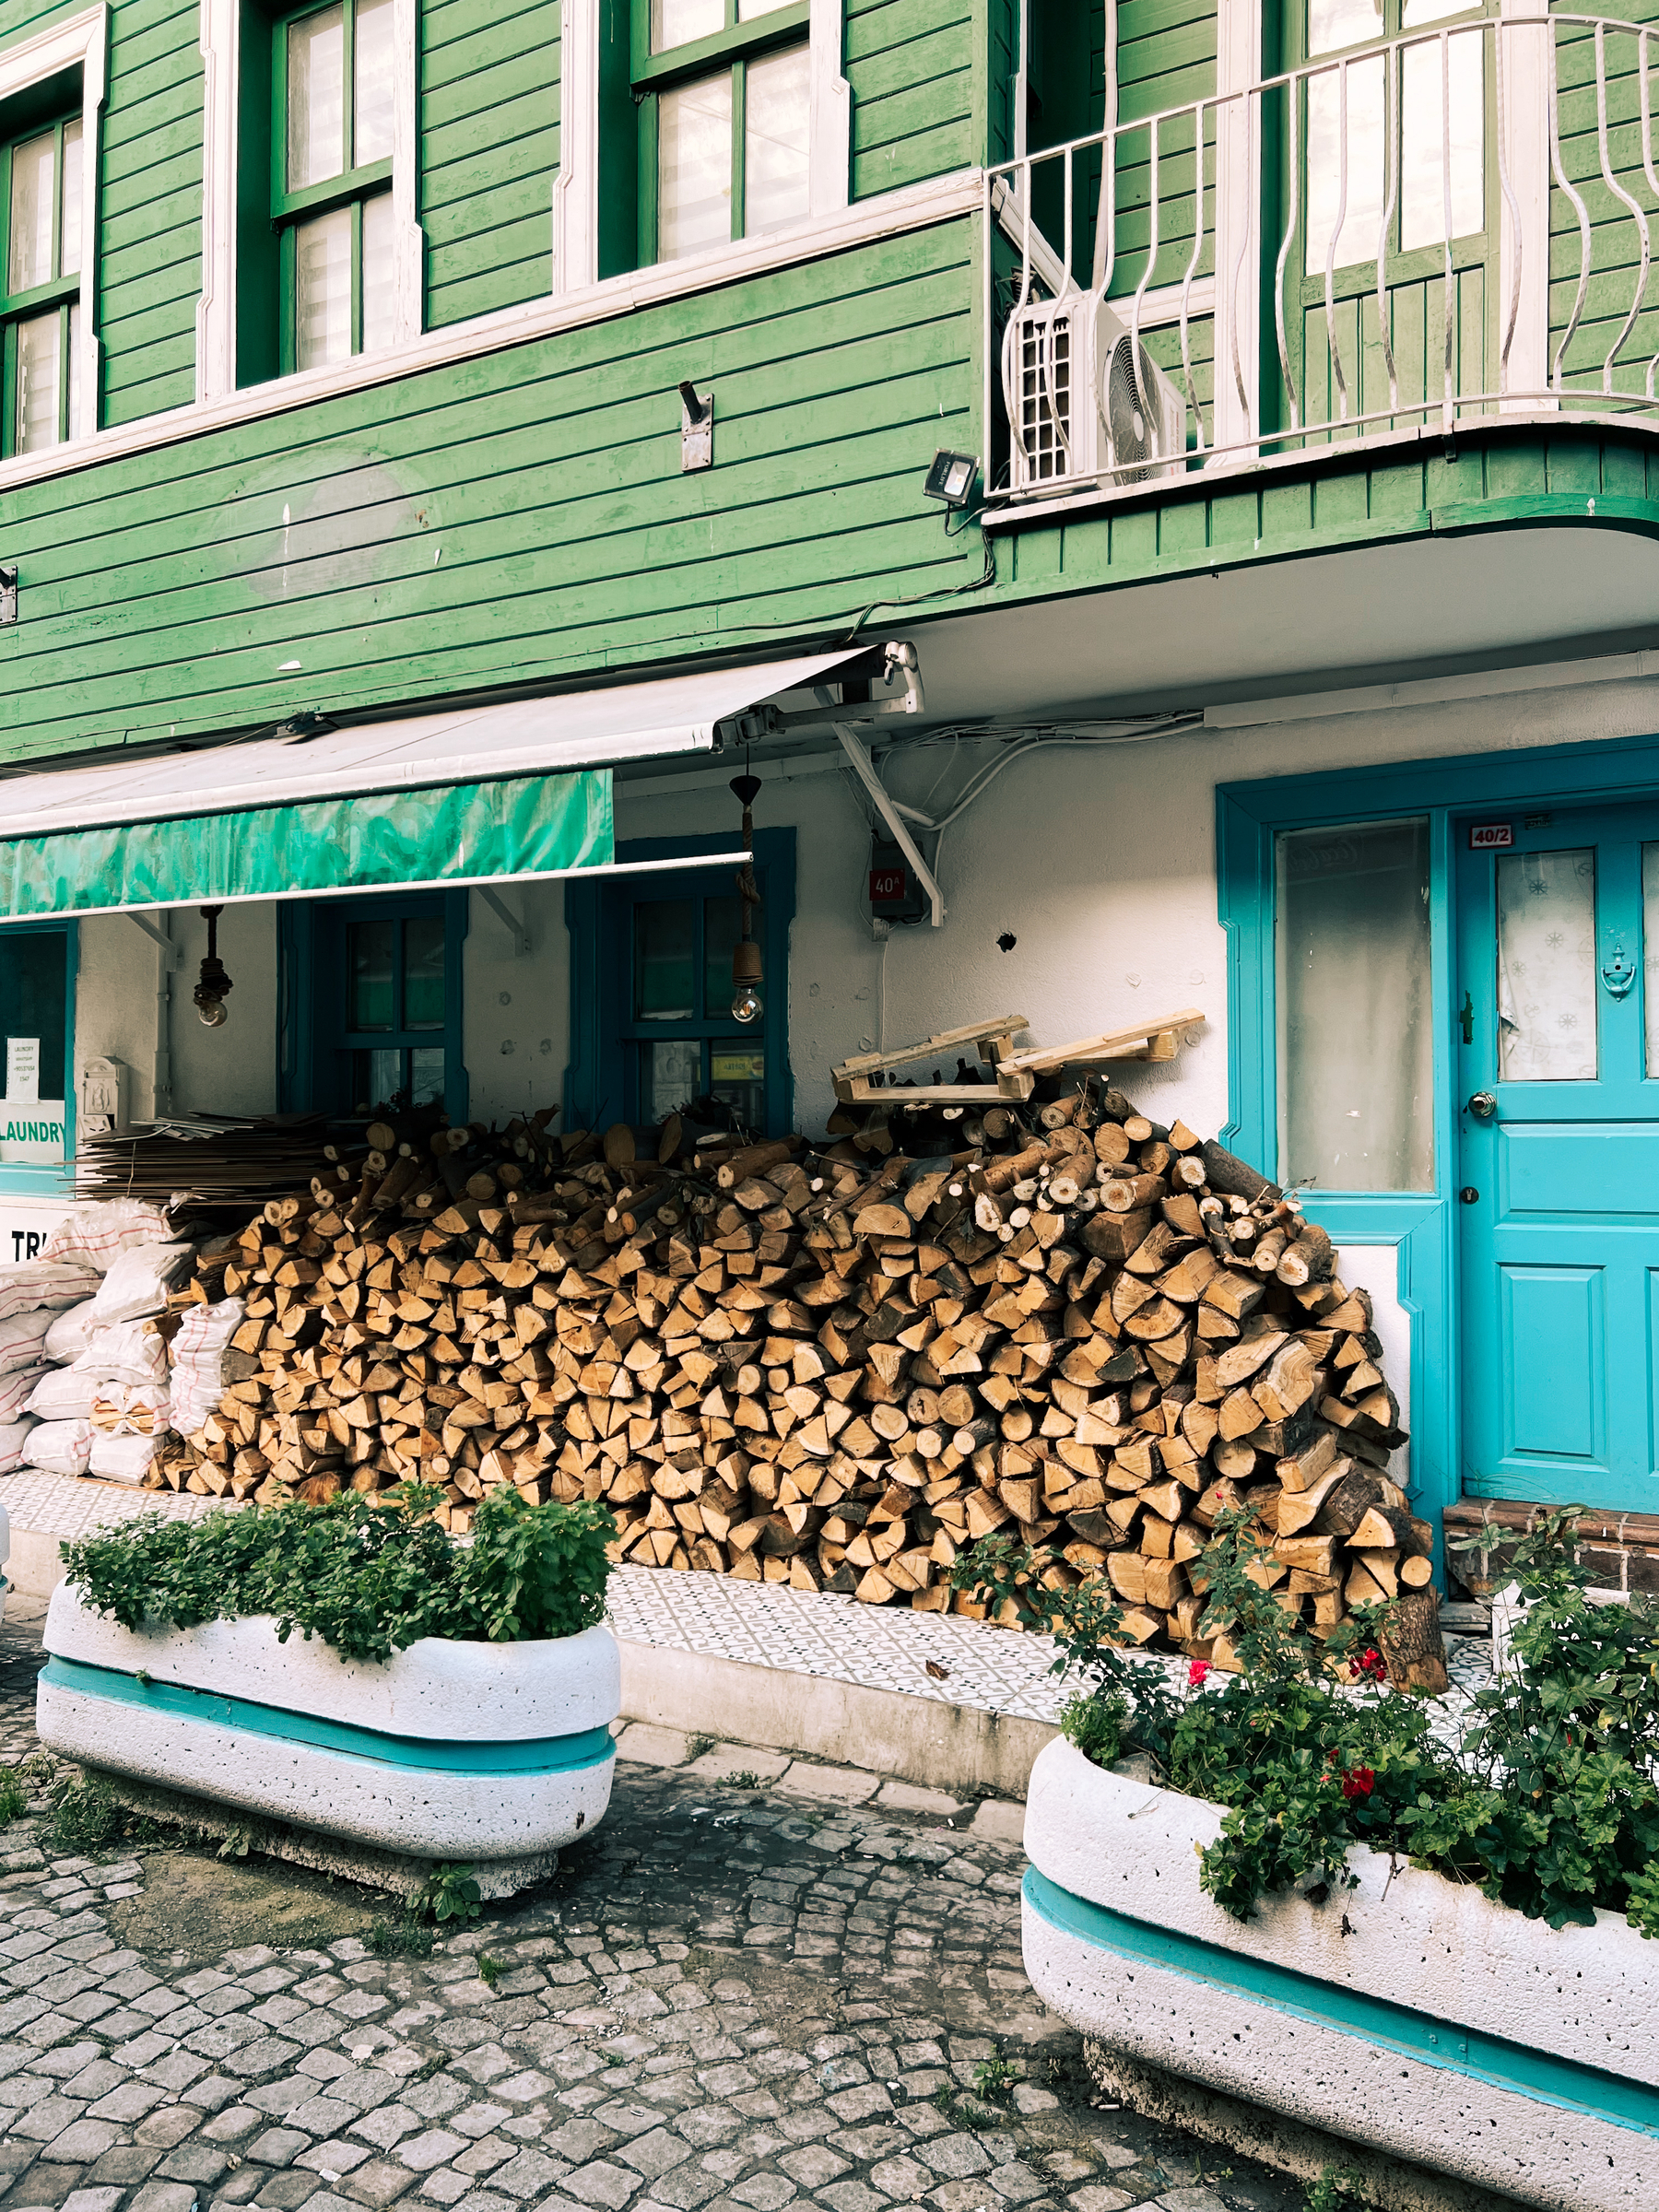 A stack of firewood piled up against the exterior wall of a building with green wooden cladding, beneath a balcony. Planters with greenery are situated in front of the woodpile.